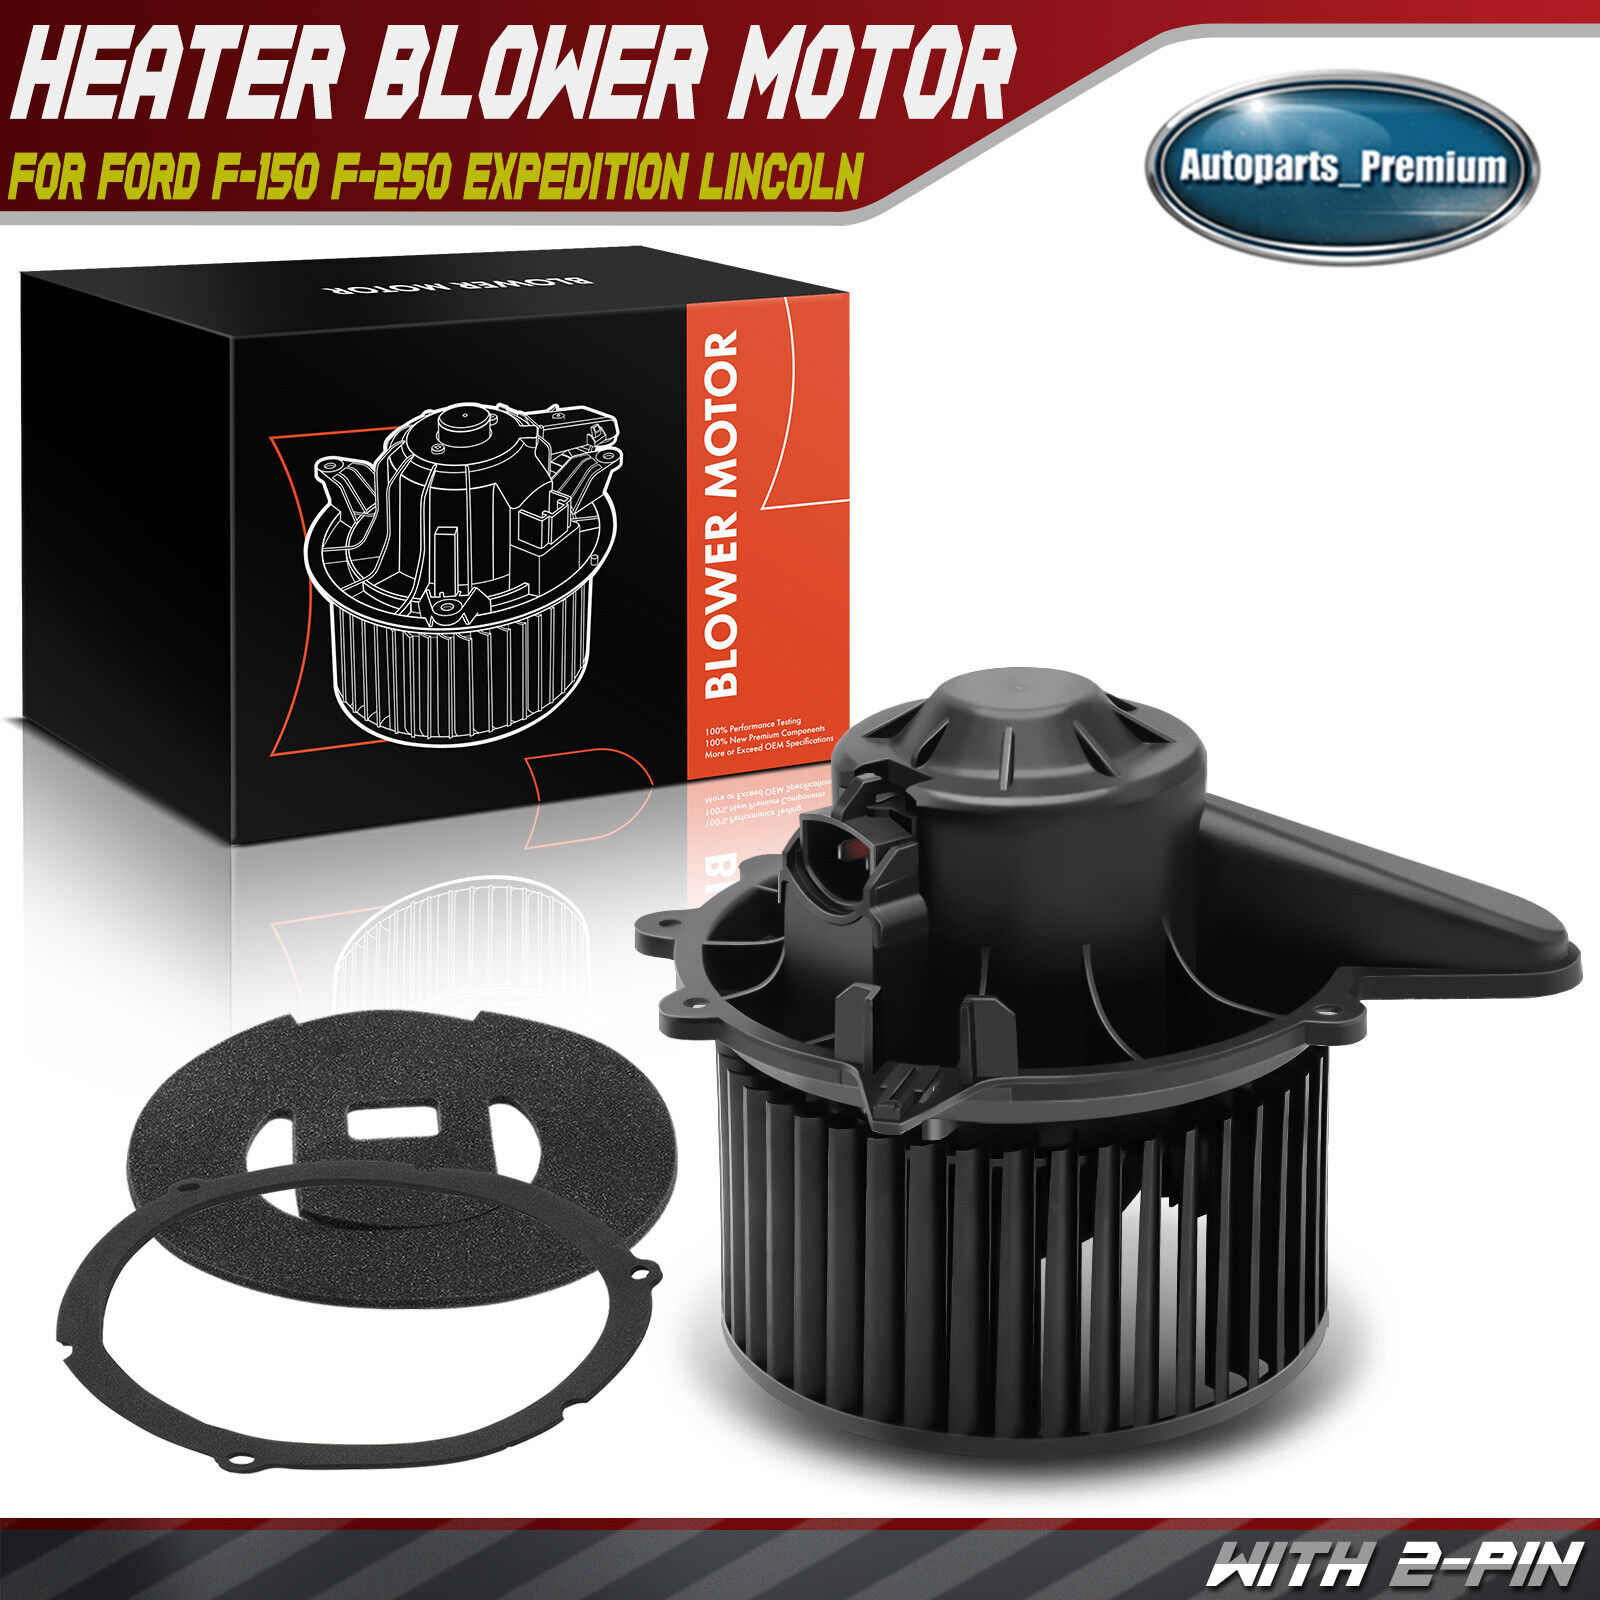 AC Heater Blower Motor for F-150 F-250 1997 1998 1999 2001 2002 2003 700027